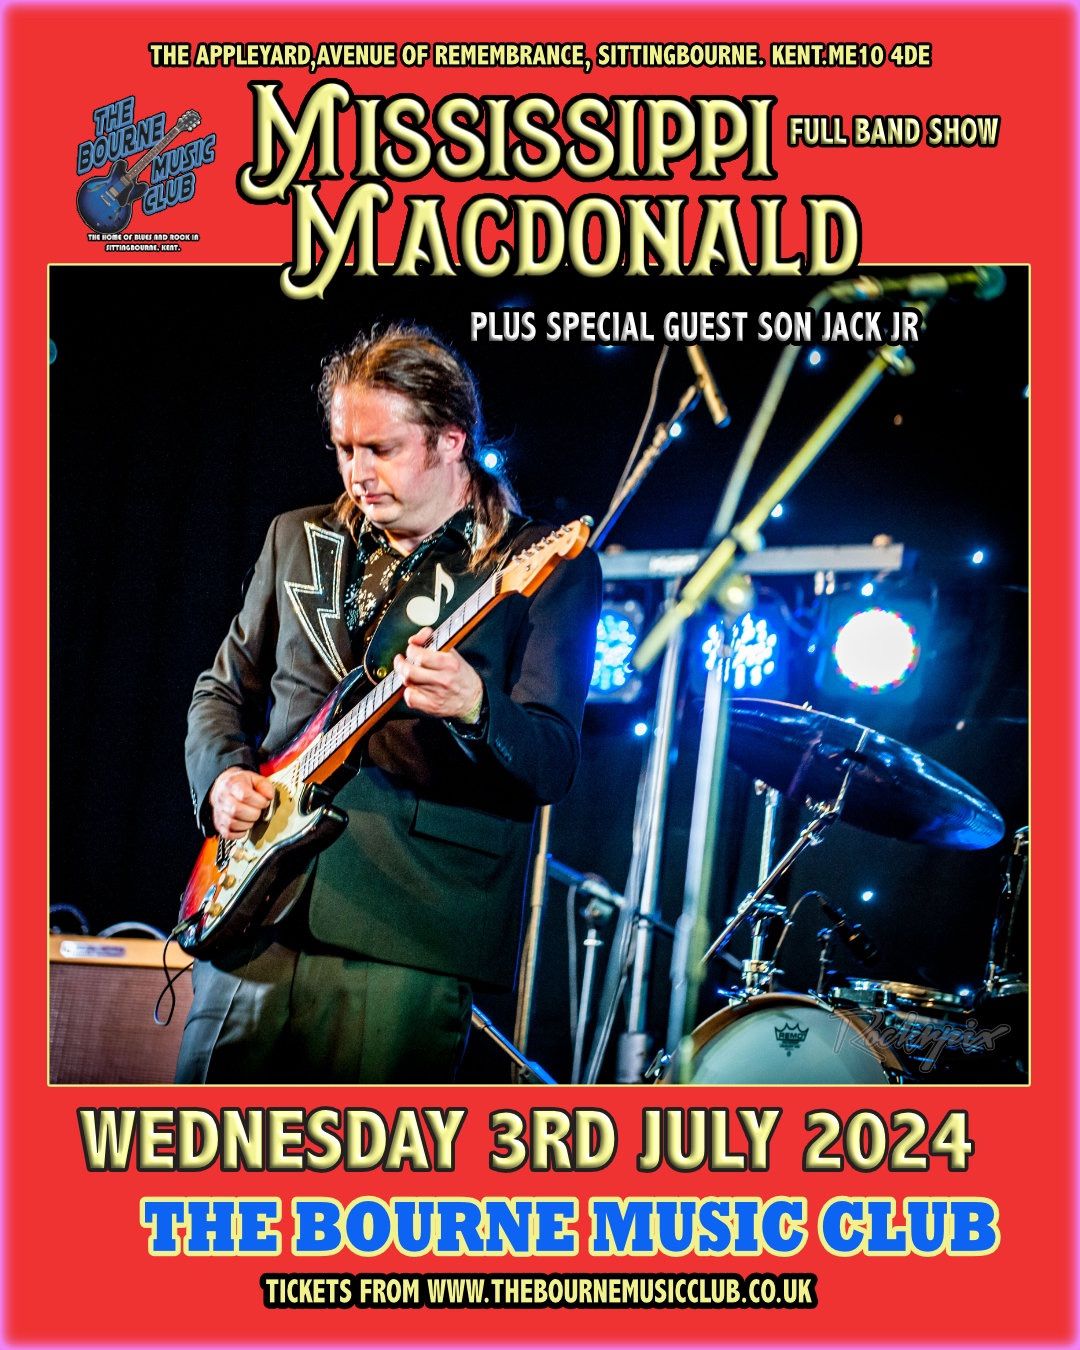 MISSISSIPPI MACDONALD LIVE AT THE BOURNE MUSIC CLUB 